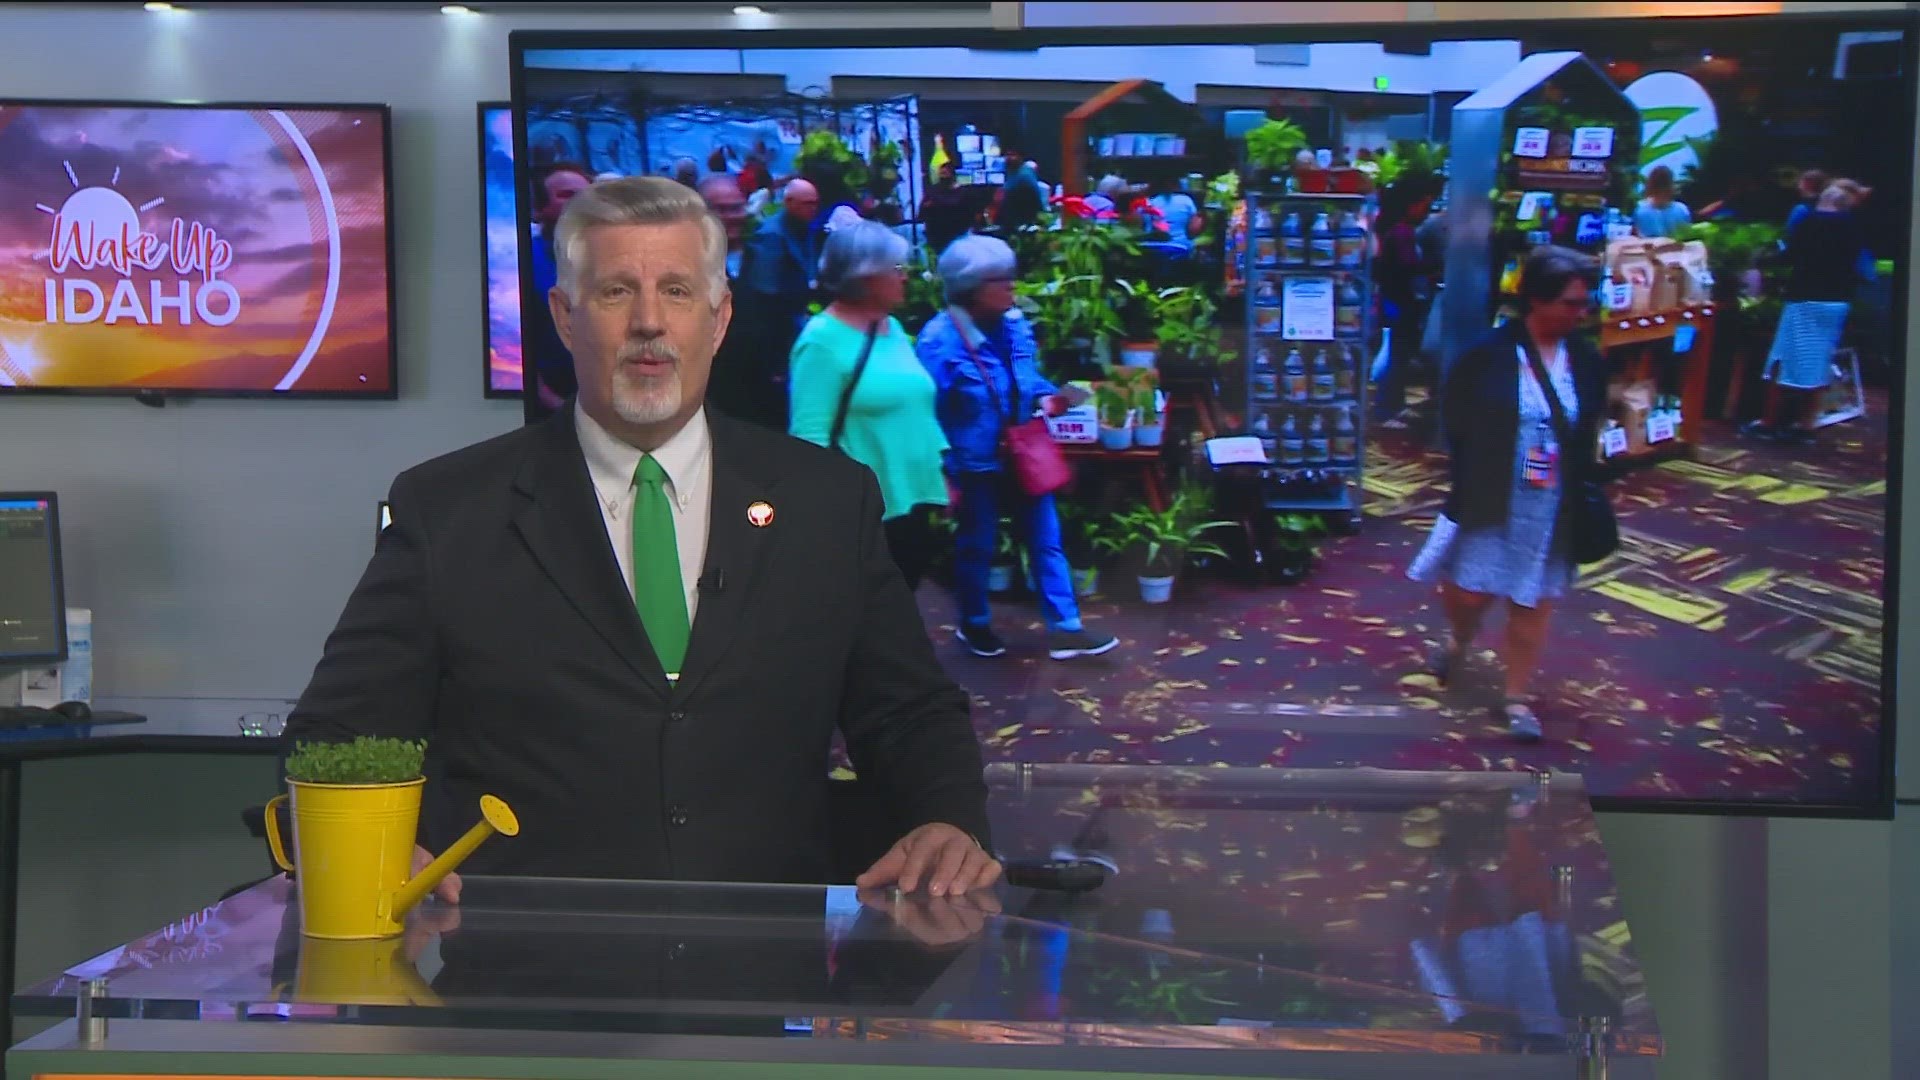 KTVB meteorologist and garden master Jim Duthie has info about the show, running March 24-26 at Boise Centre.